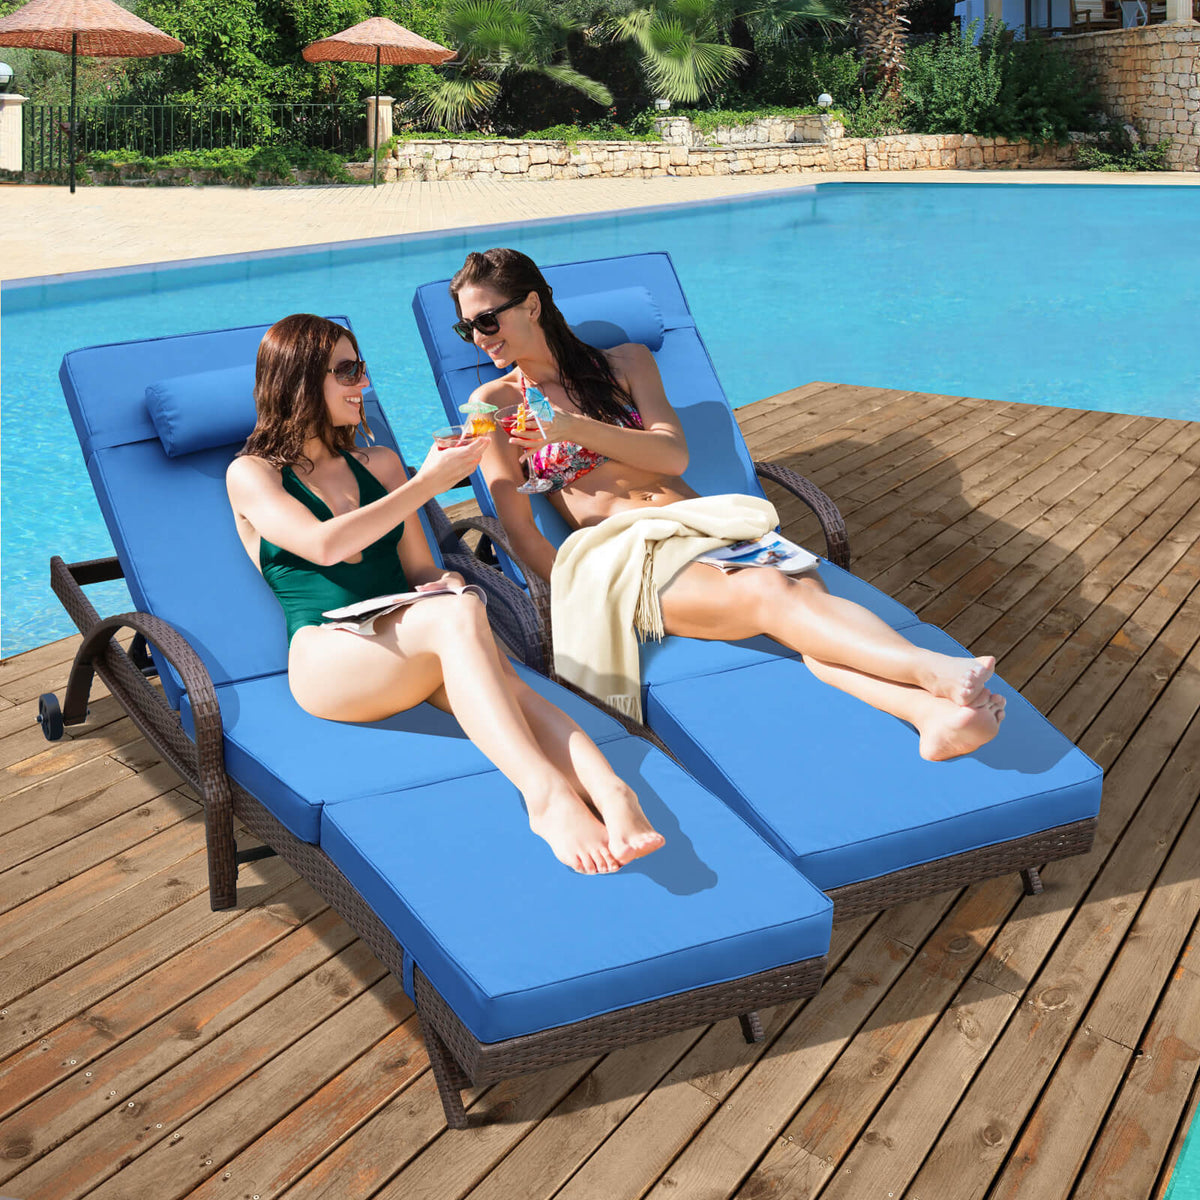 2 Pcs Patio Chaise Lounge Chairs Poolside Lounger w/ 6 Reclining Positions & Wheels, Blue Cushion